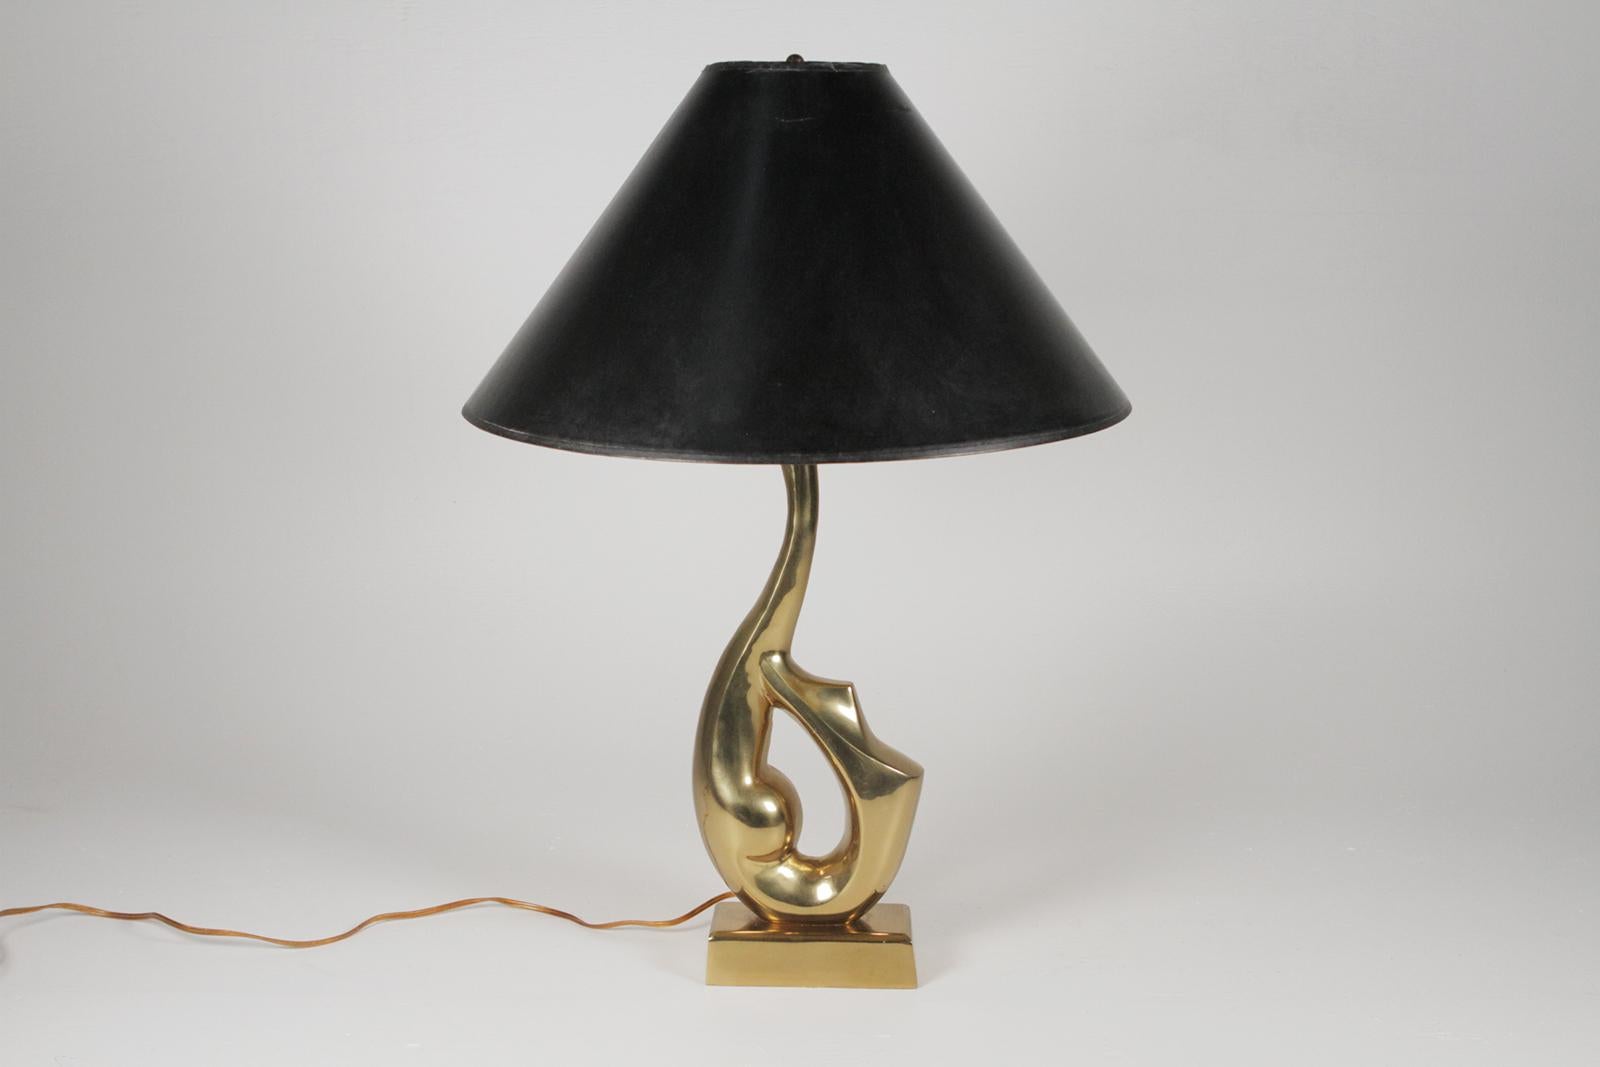 Midcentury brass lamp in the form of a swimmer
Dimensions 7’ W x 3.5